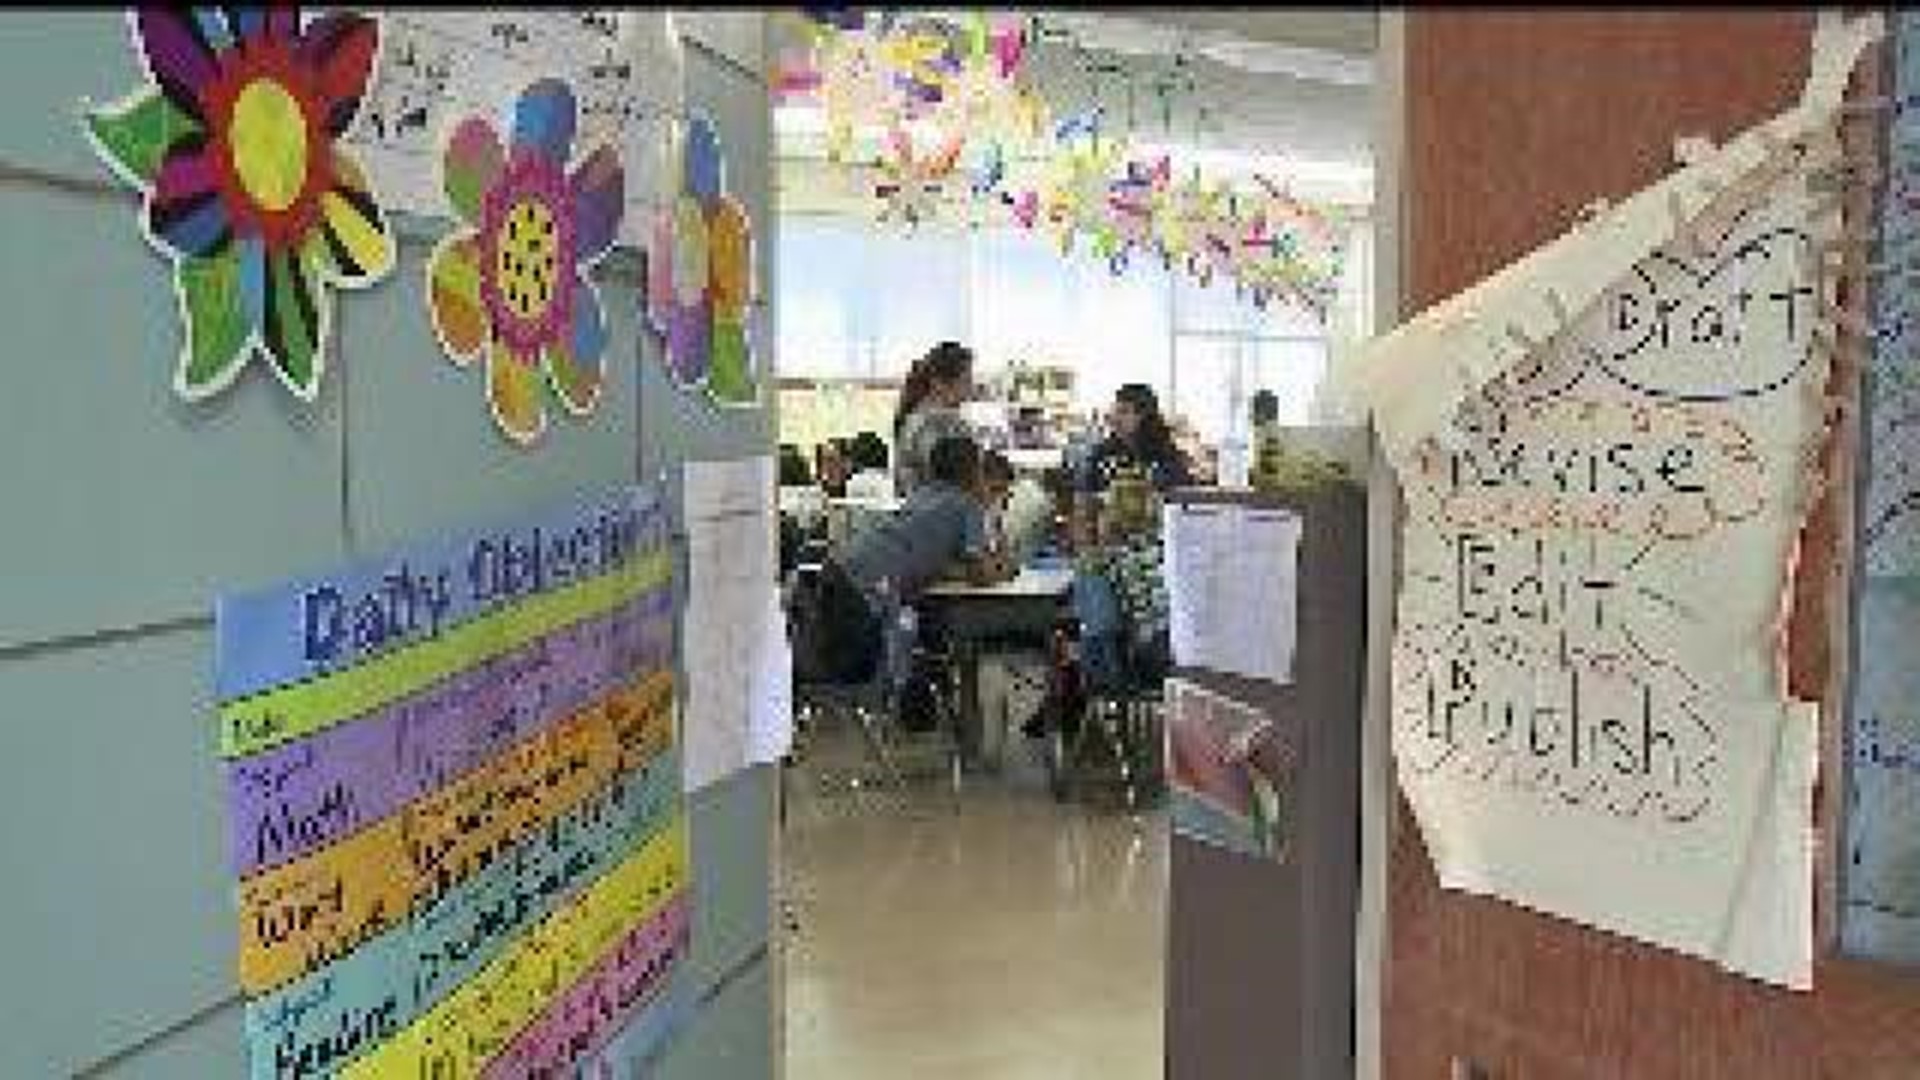 Local Schools apply for much needed grants